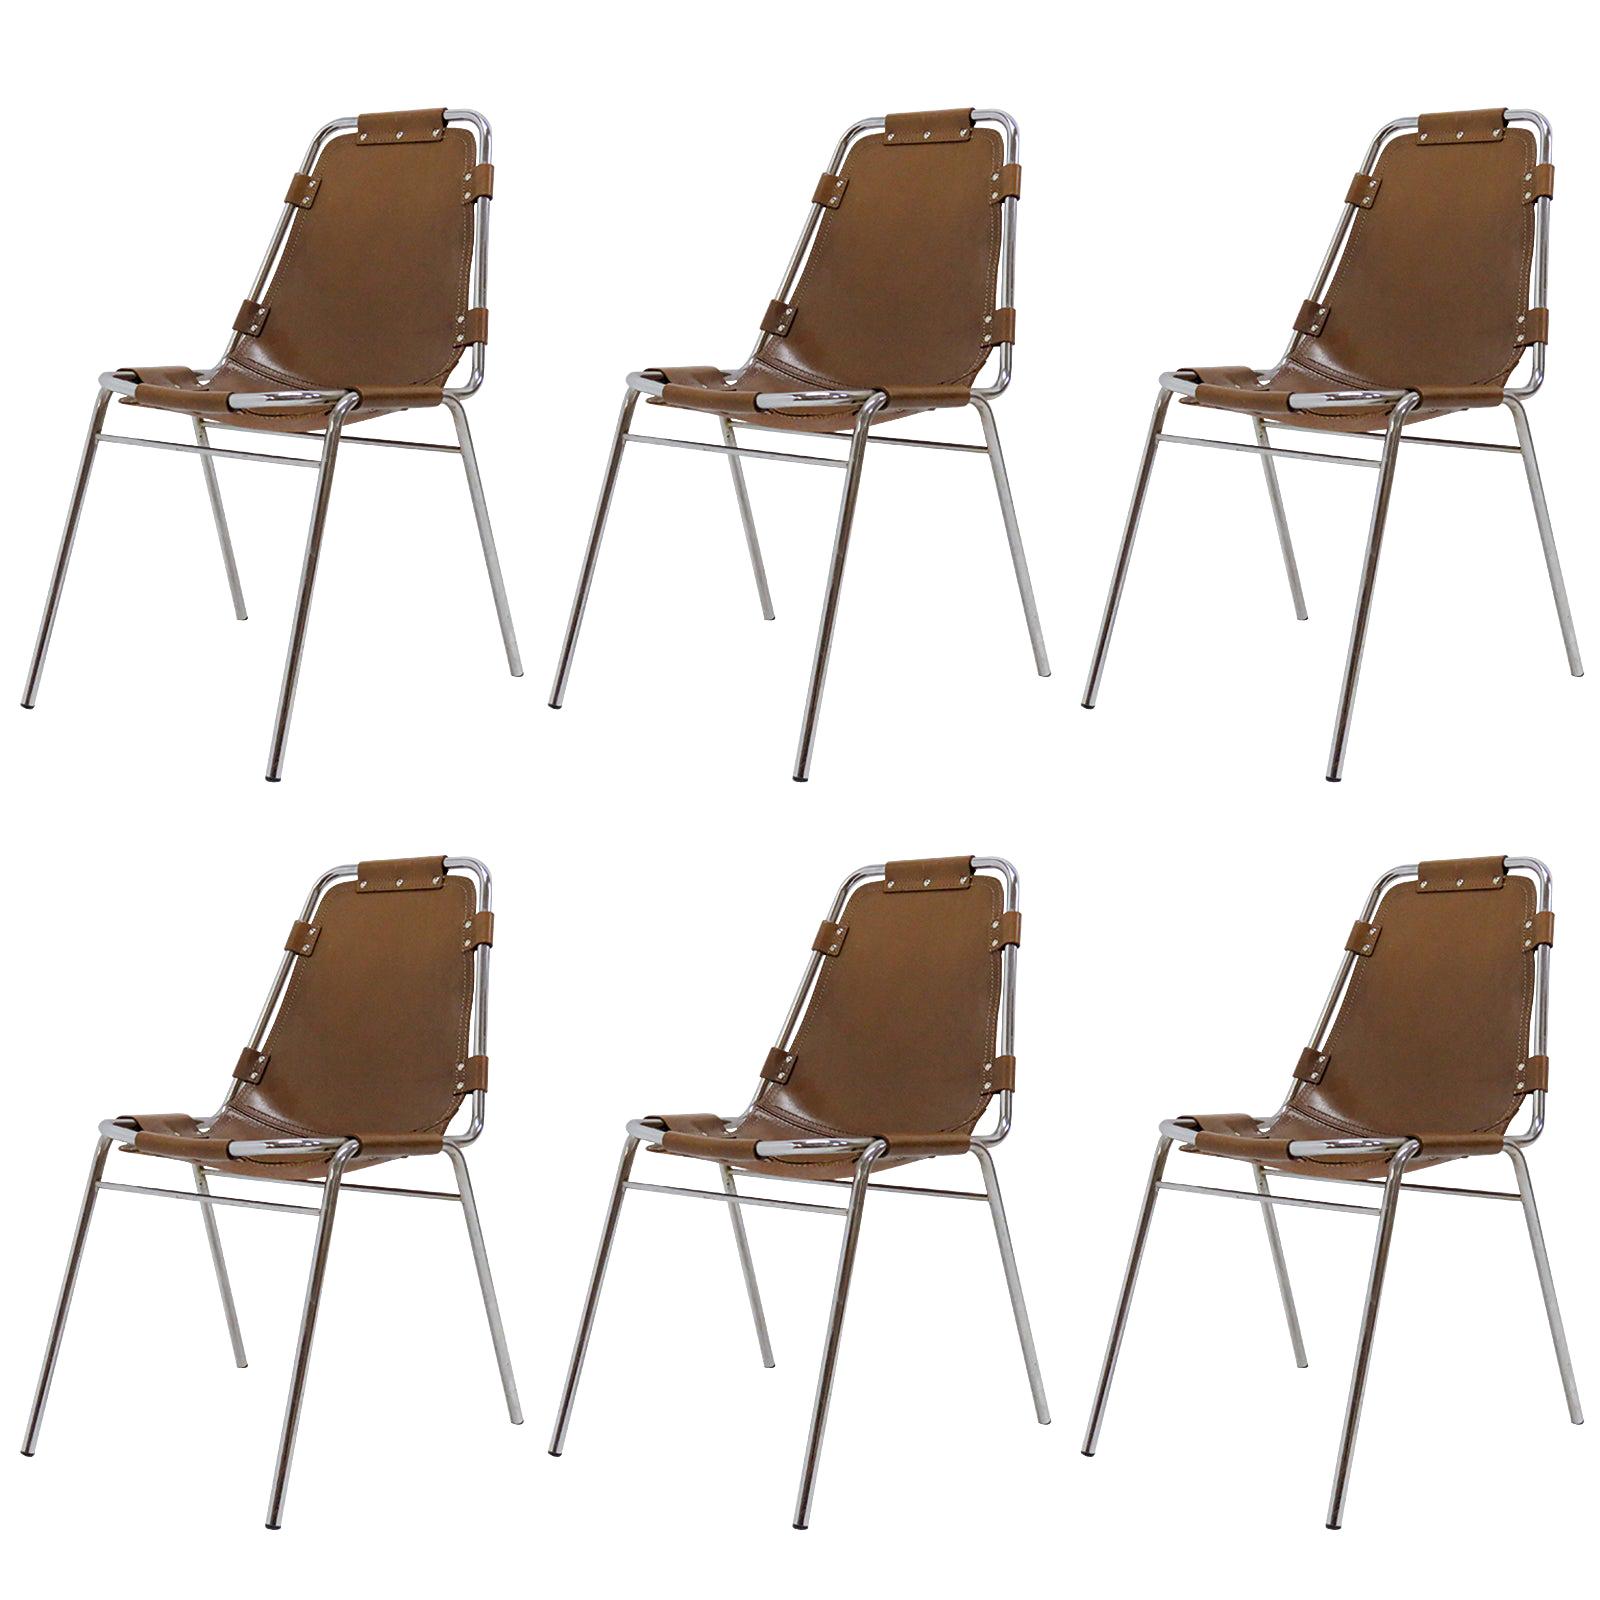 “Les Arc” Chairs Selected by Charlotte Perriand